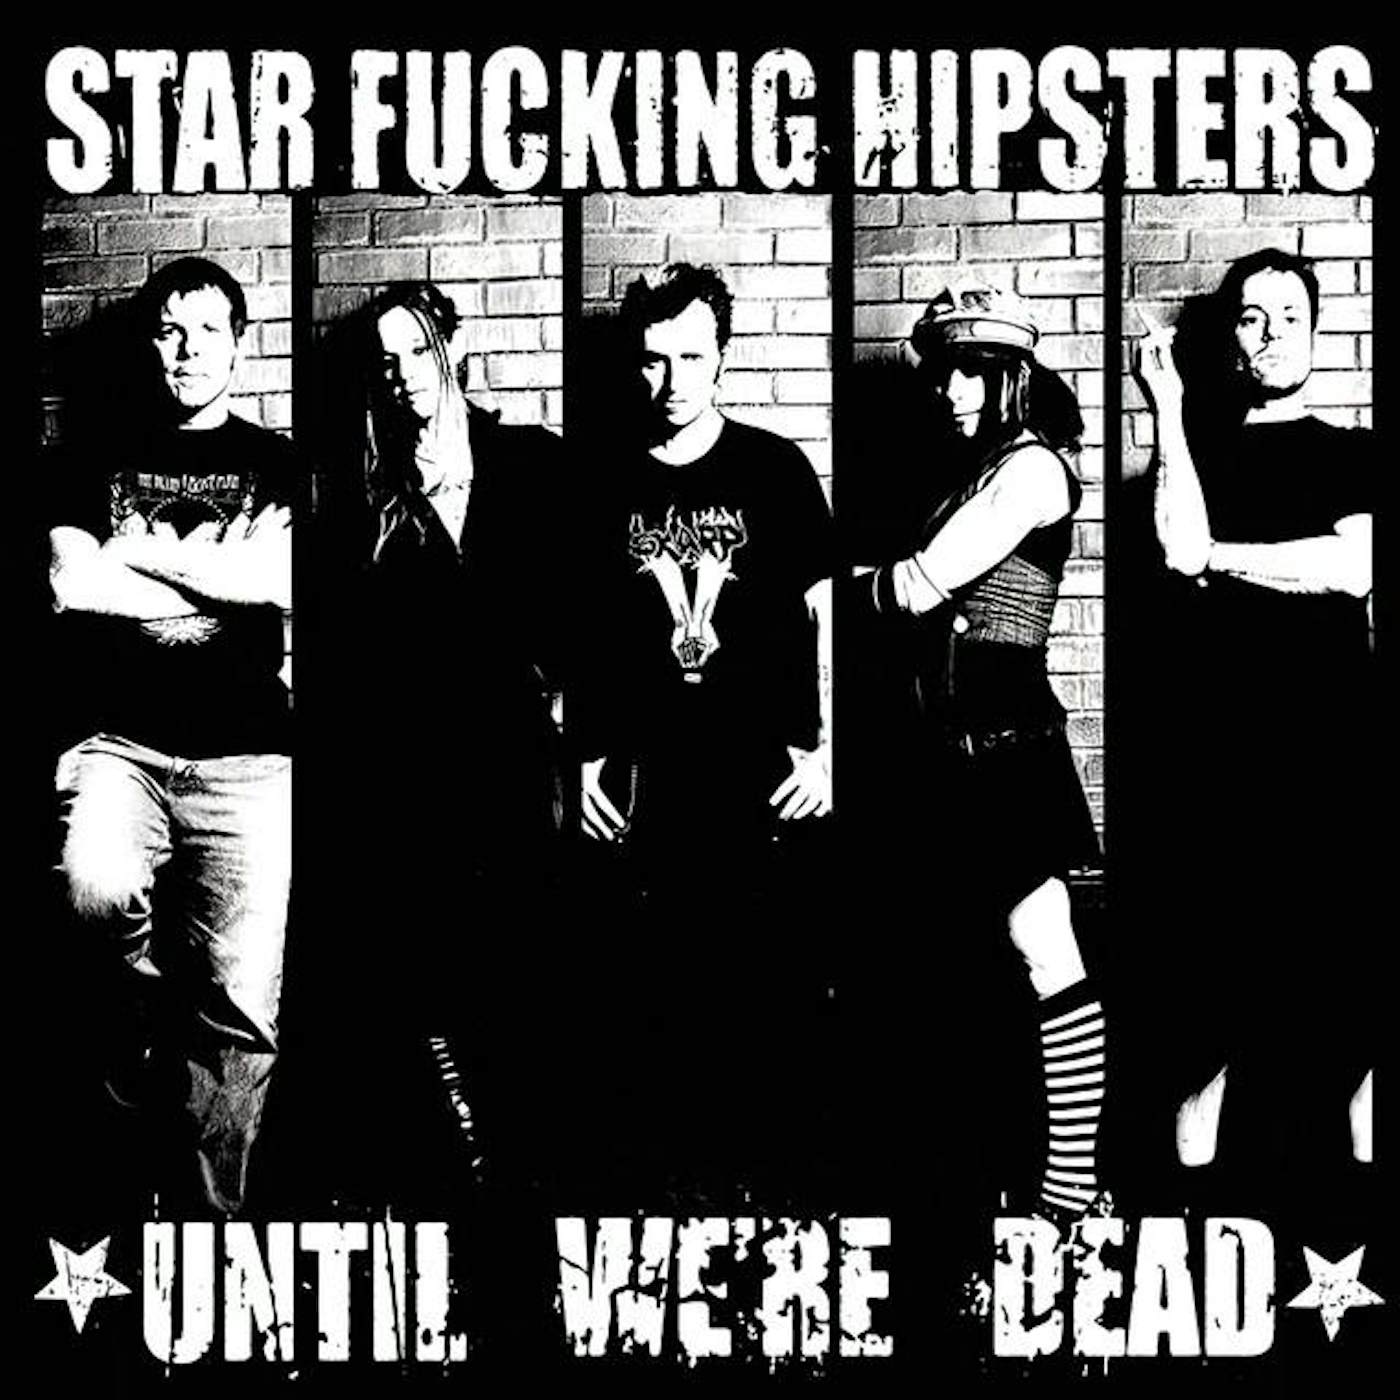 Star Fucking Hipsters